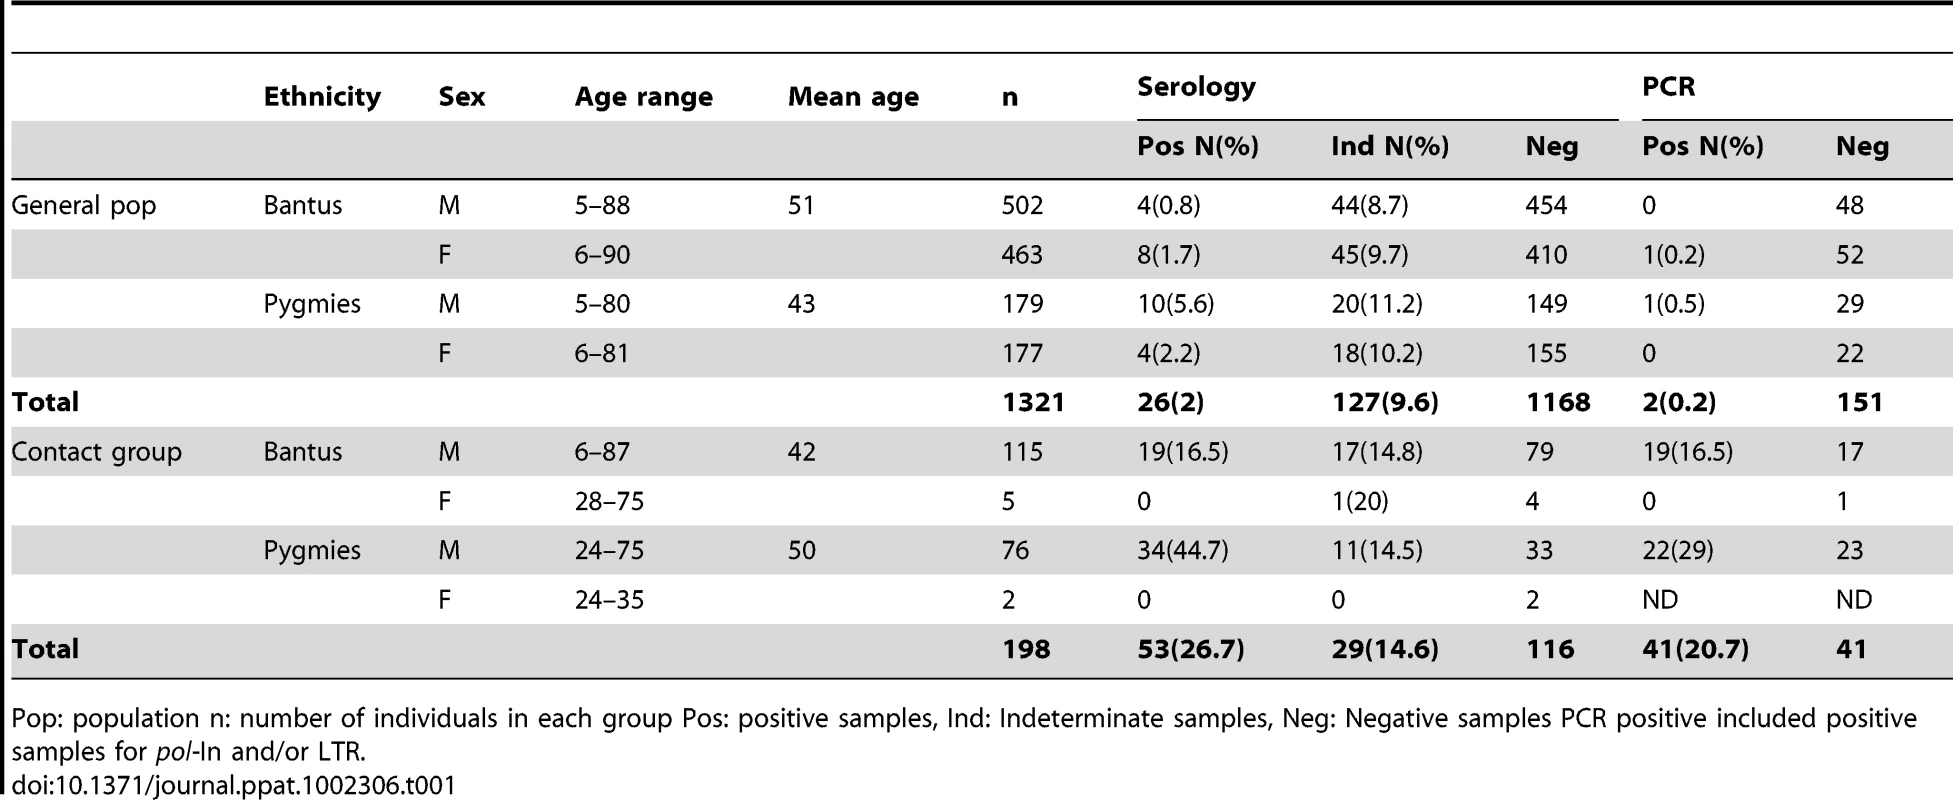 Global description of the general population group and the contact group, and overall serology and PCR results.